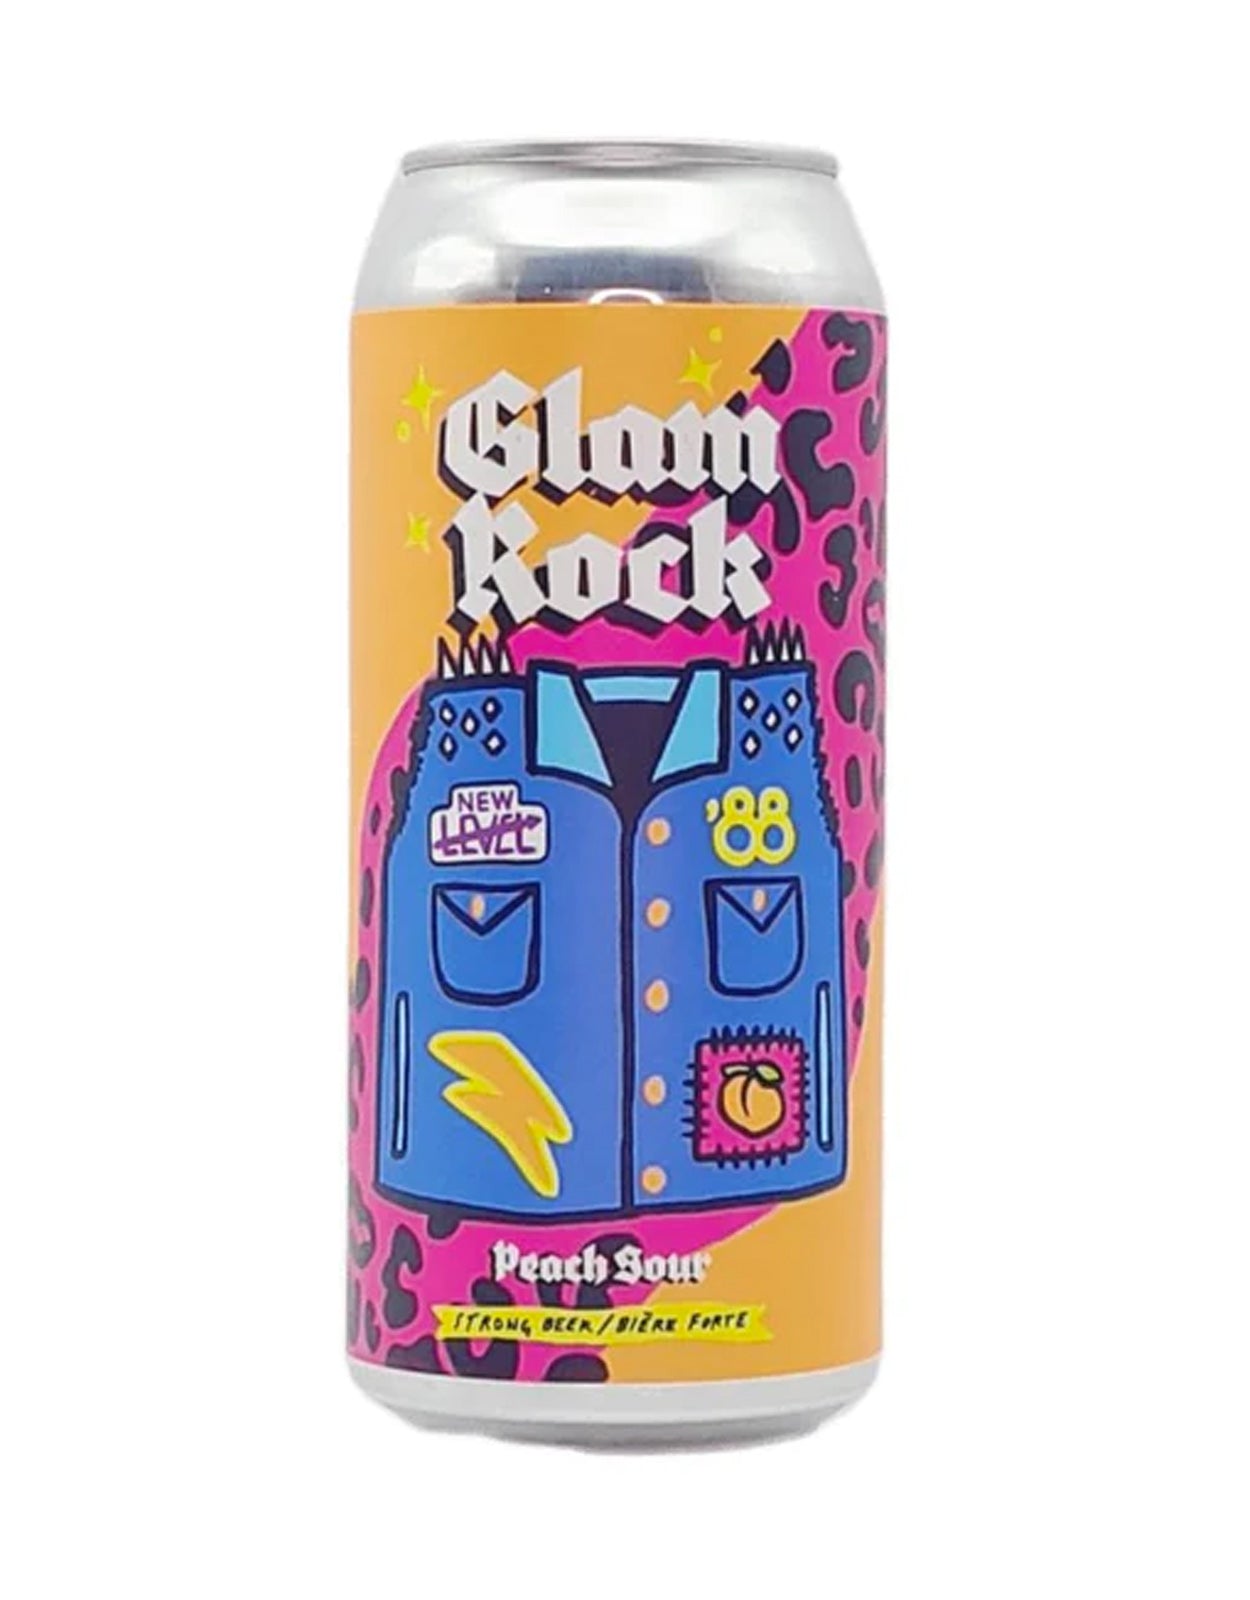 Buy New Level Brewing Glam Rock Peach Sour 473 ml - 4 Cans | ZYN